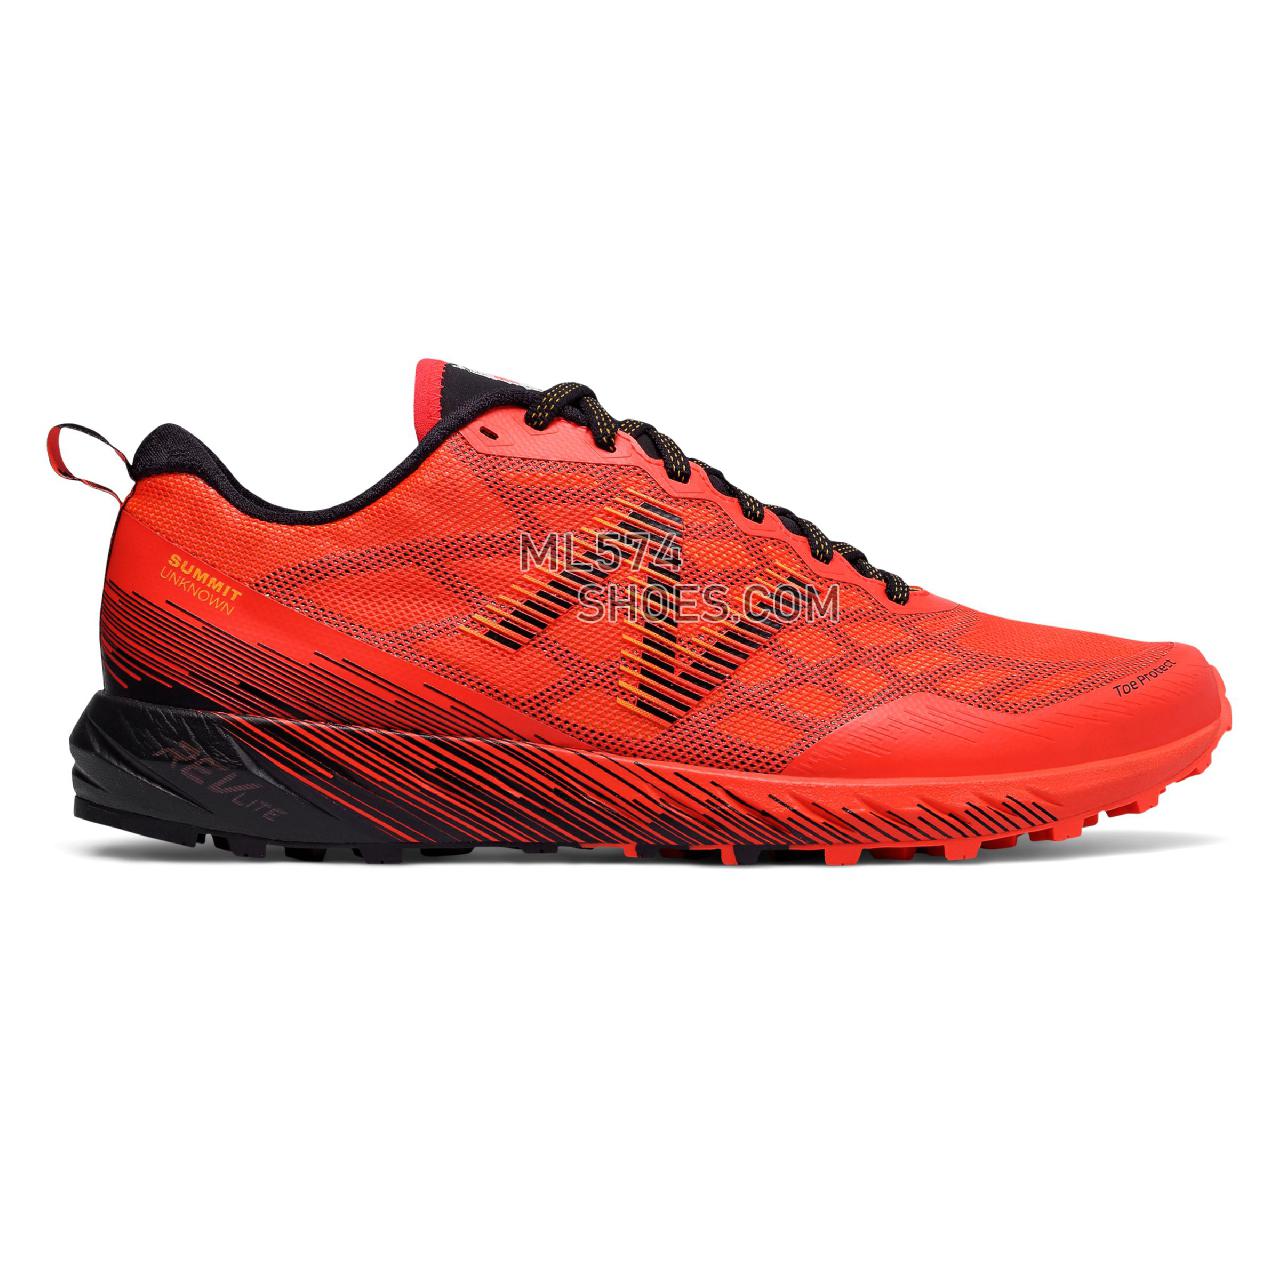 New Balance Summit Unknown - Men's  - Running Flame with Impulse - MTUNKNF